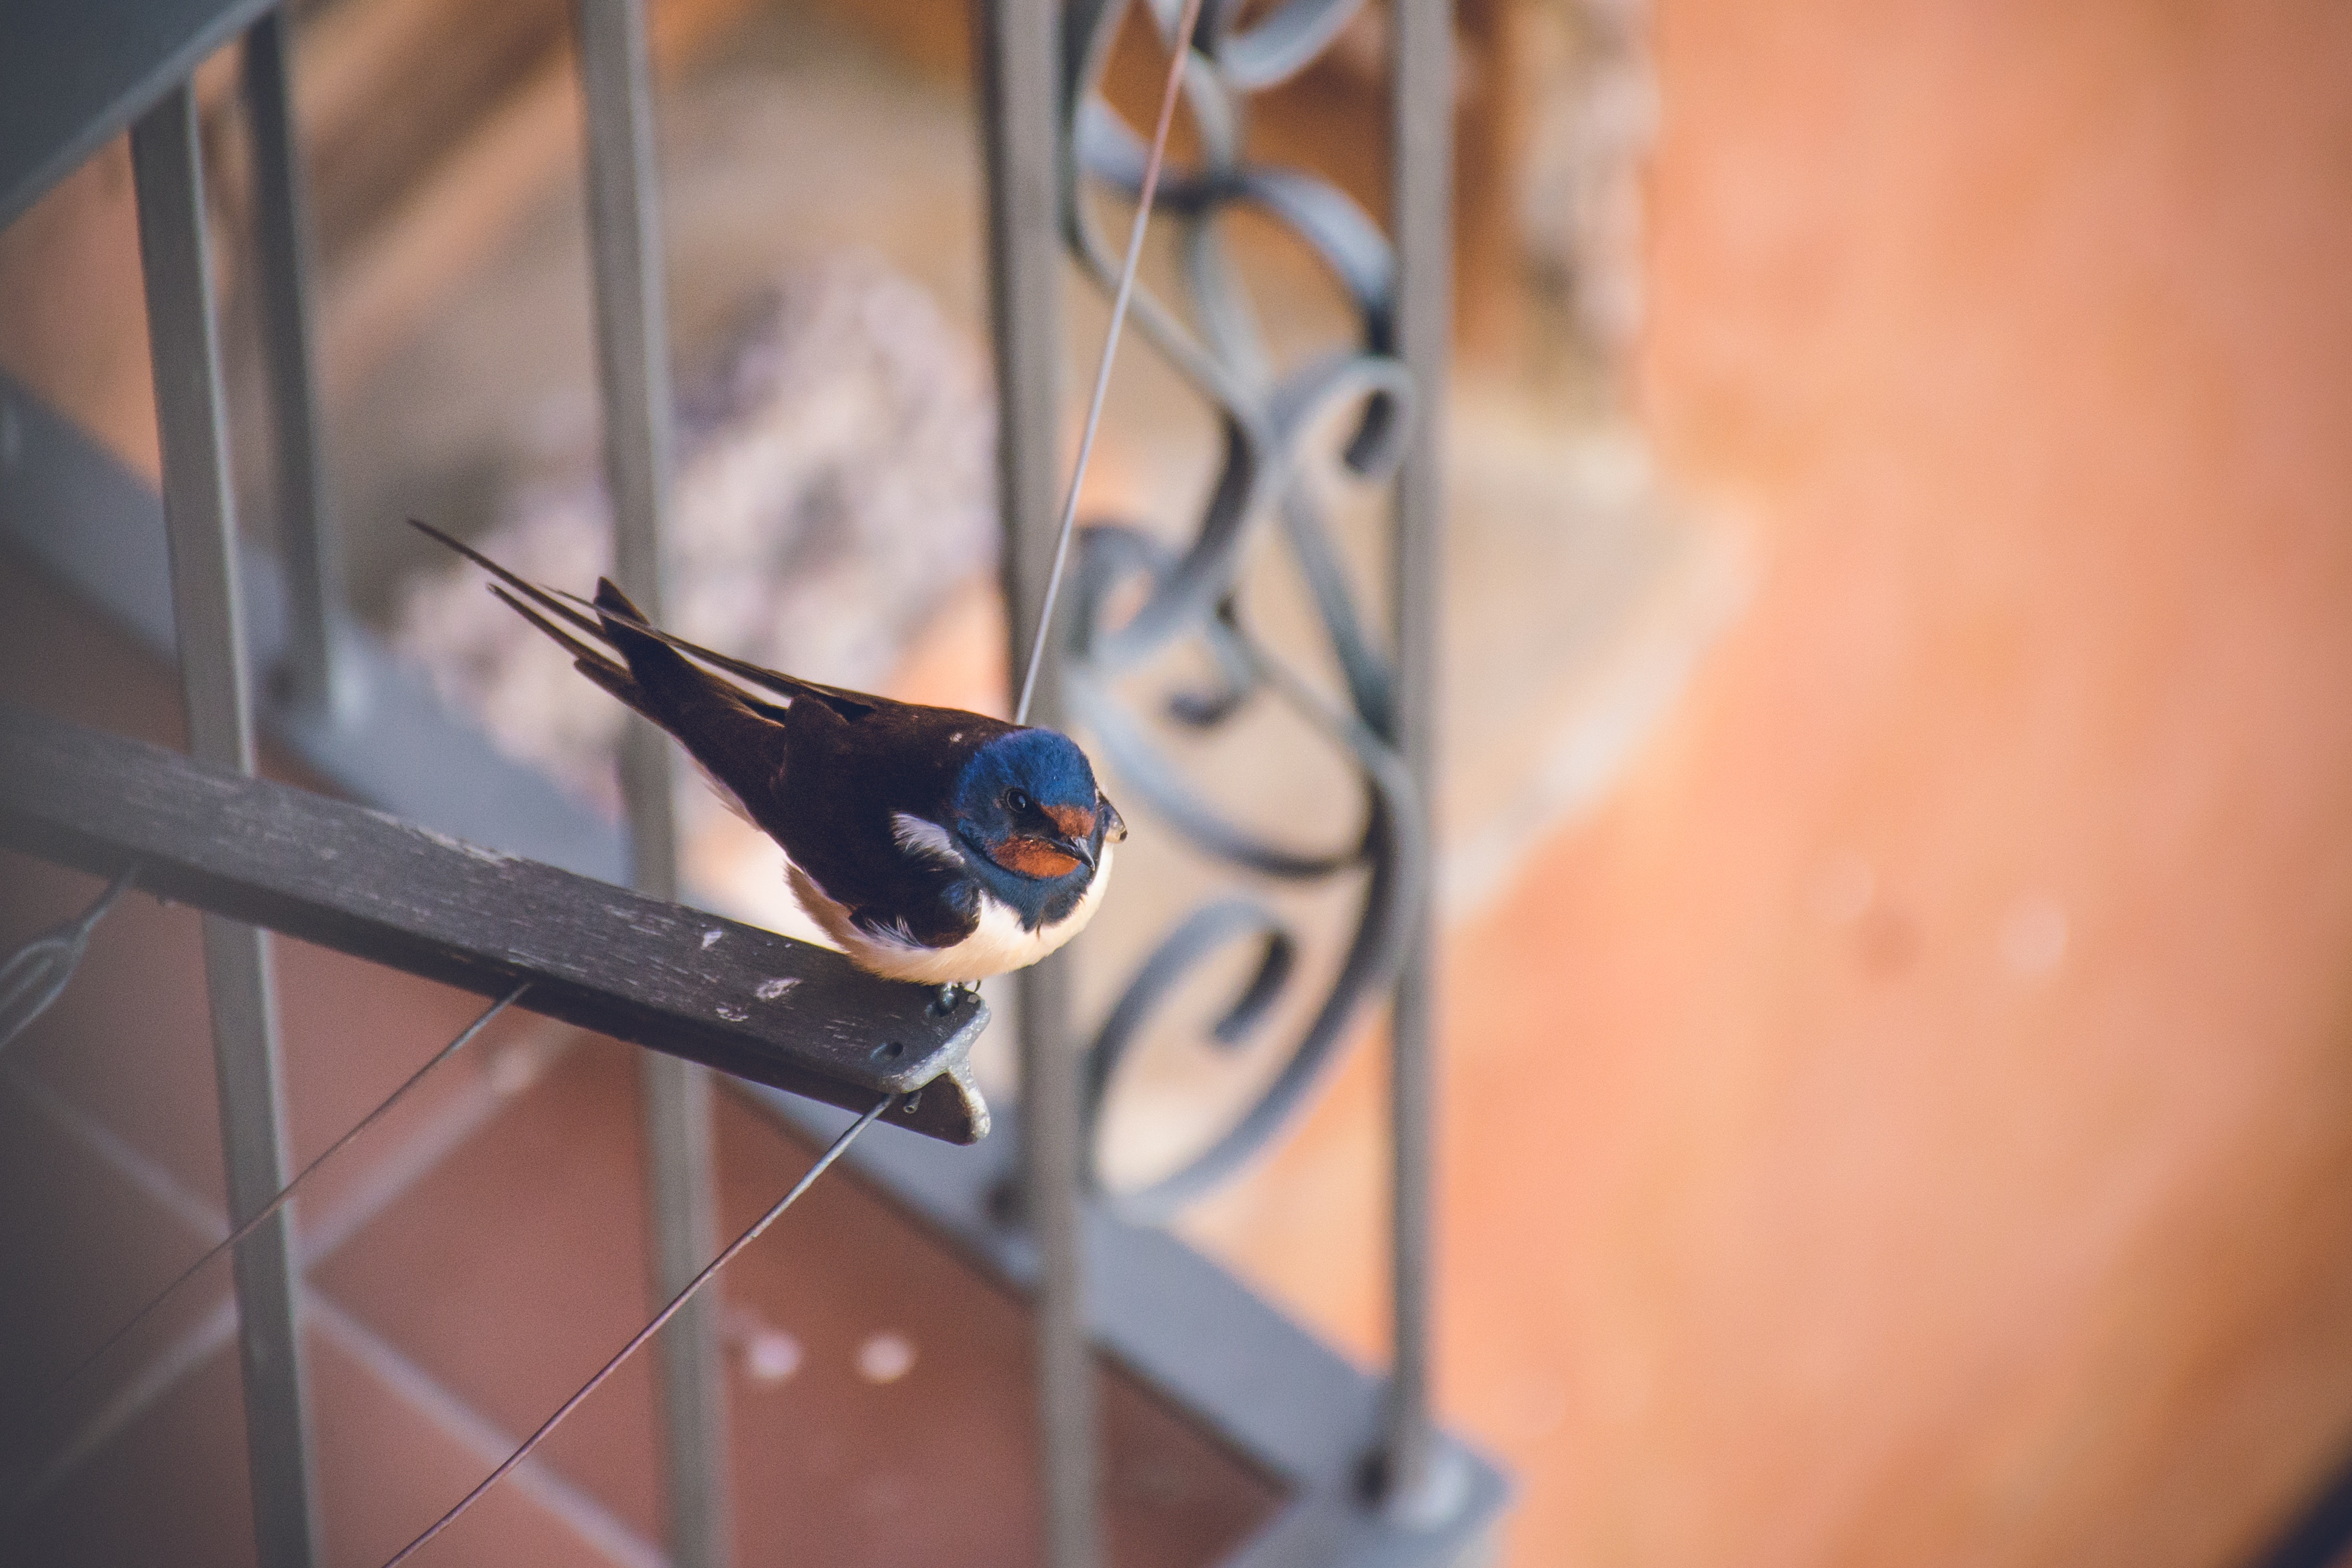 Swallow perched on a balcony